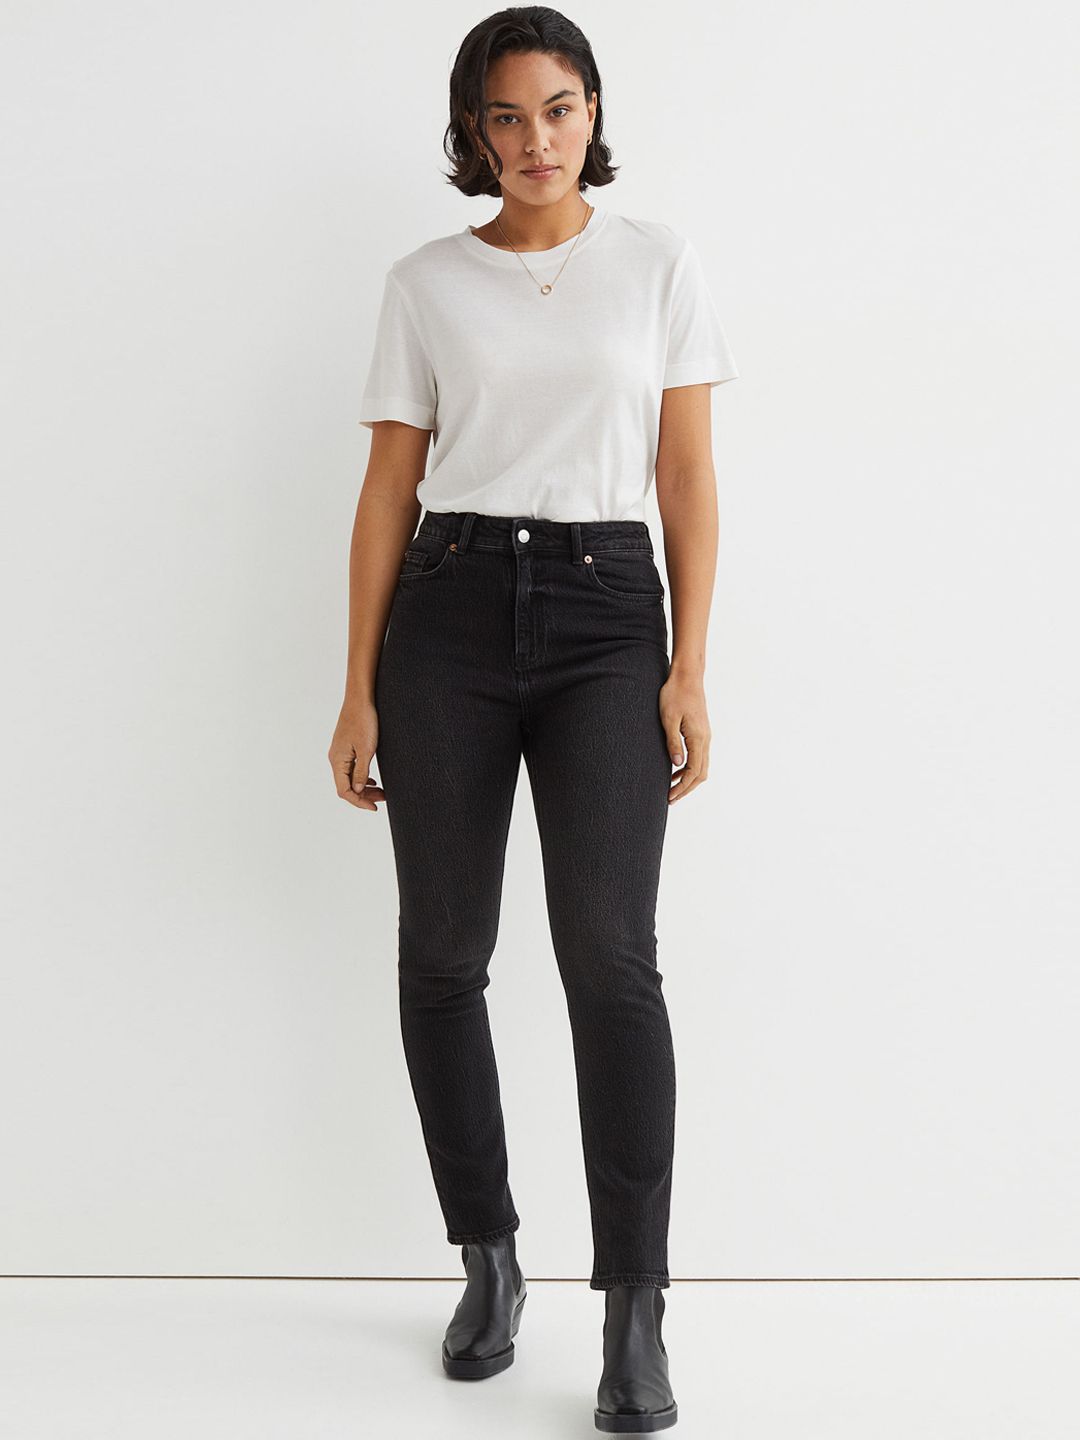 H&M Women Black Solid Slim High Ankle Jeans Price in India